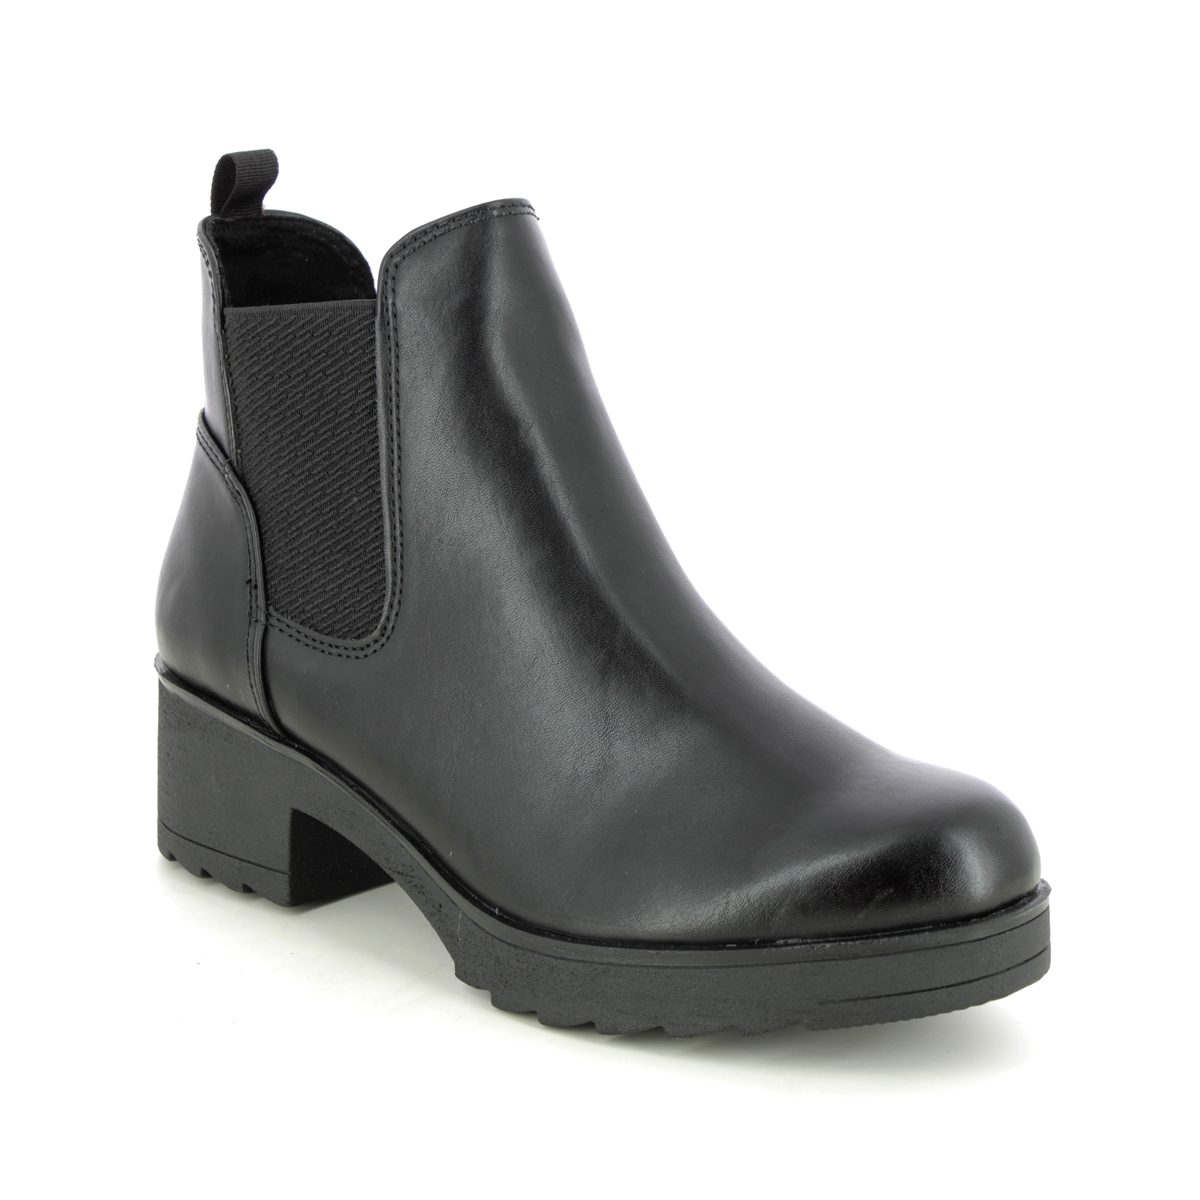 Marco Tozzi Dono Chelsea Black Womens Chelsea Boots 25806-41-001 in a Plain Man-made in Size 40